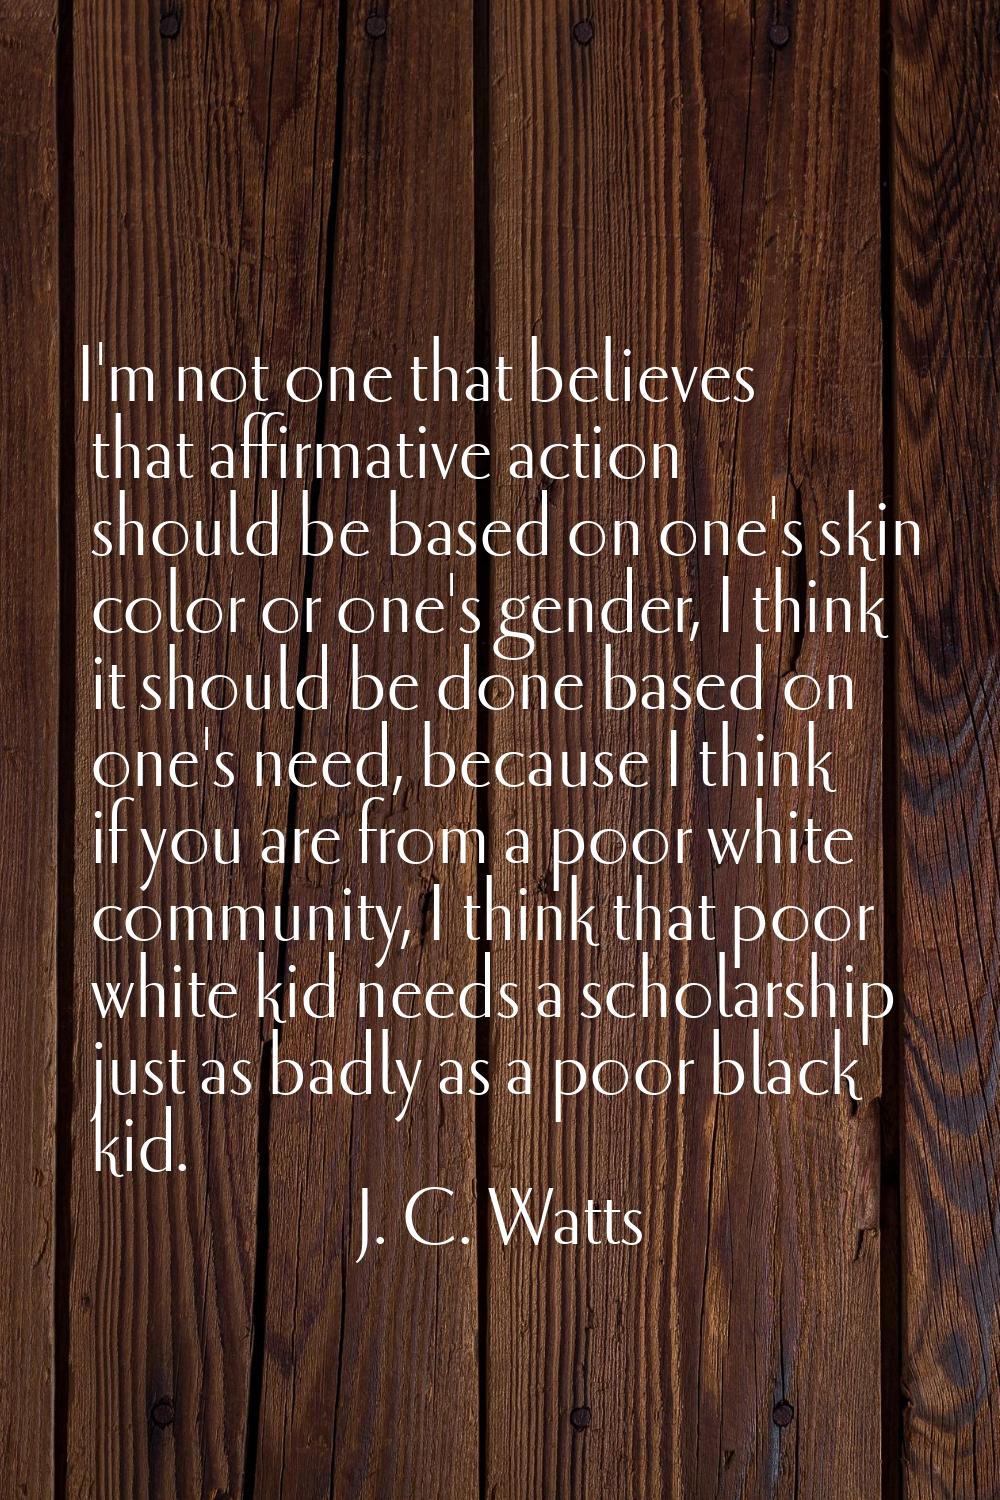 I'm not one that believes that affirmative action should be based on one's skin color or one's gend